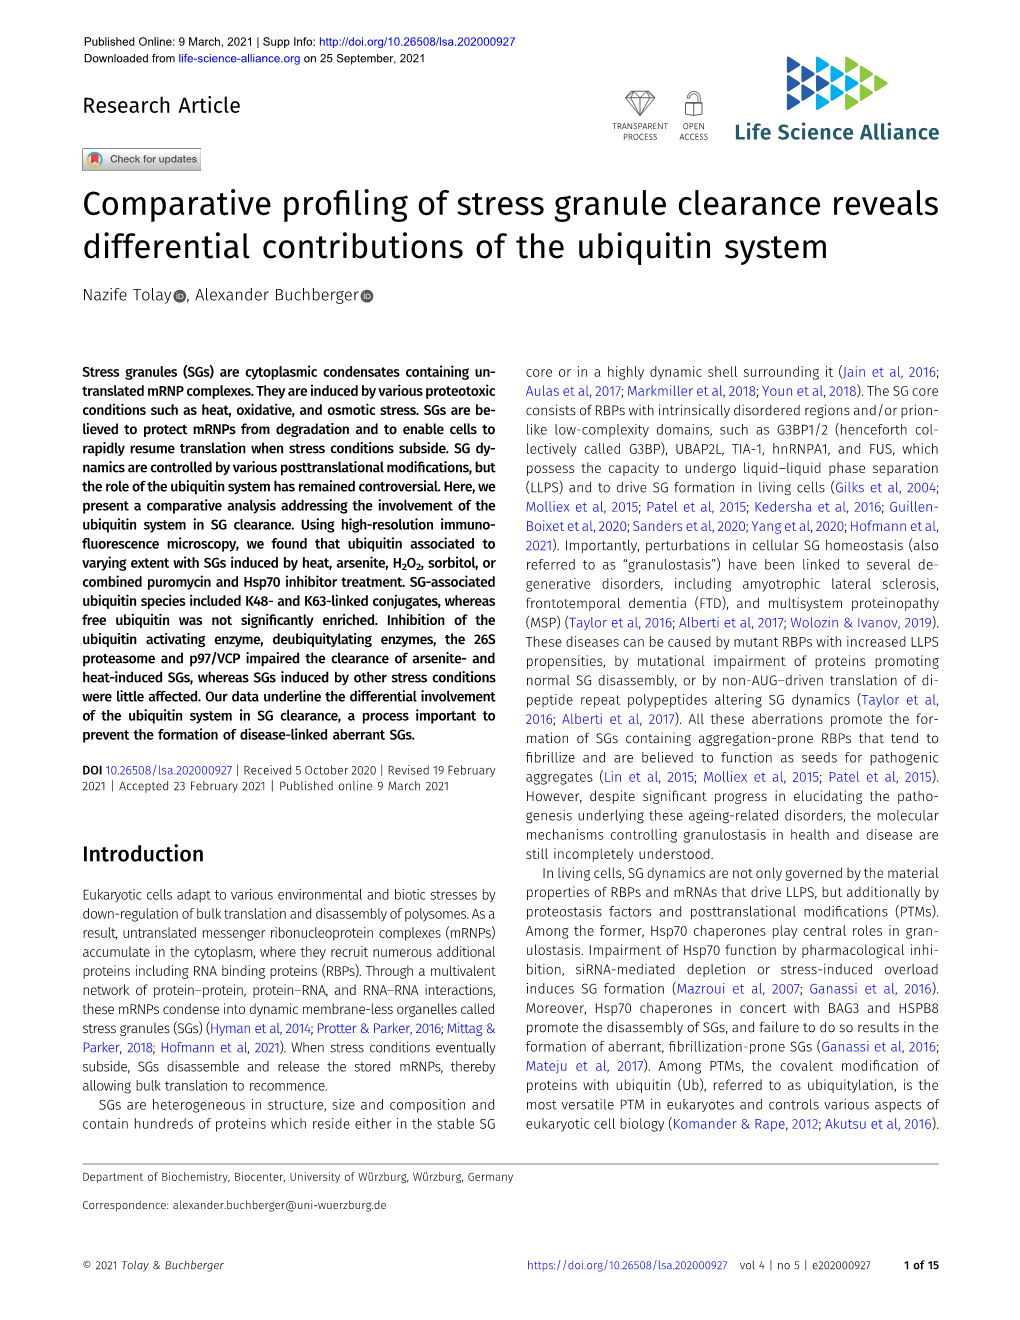 Comparative Profiling of Stress Granule Clearance Reveals Differential Contributions of the Ubiquitin System